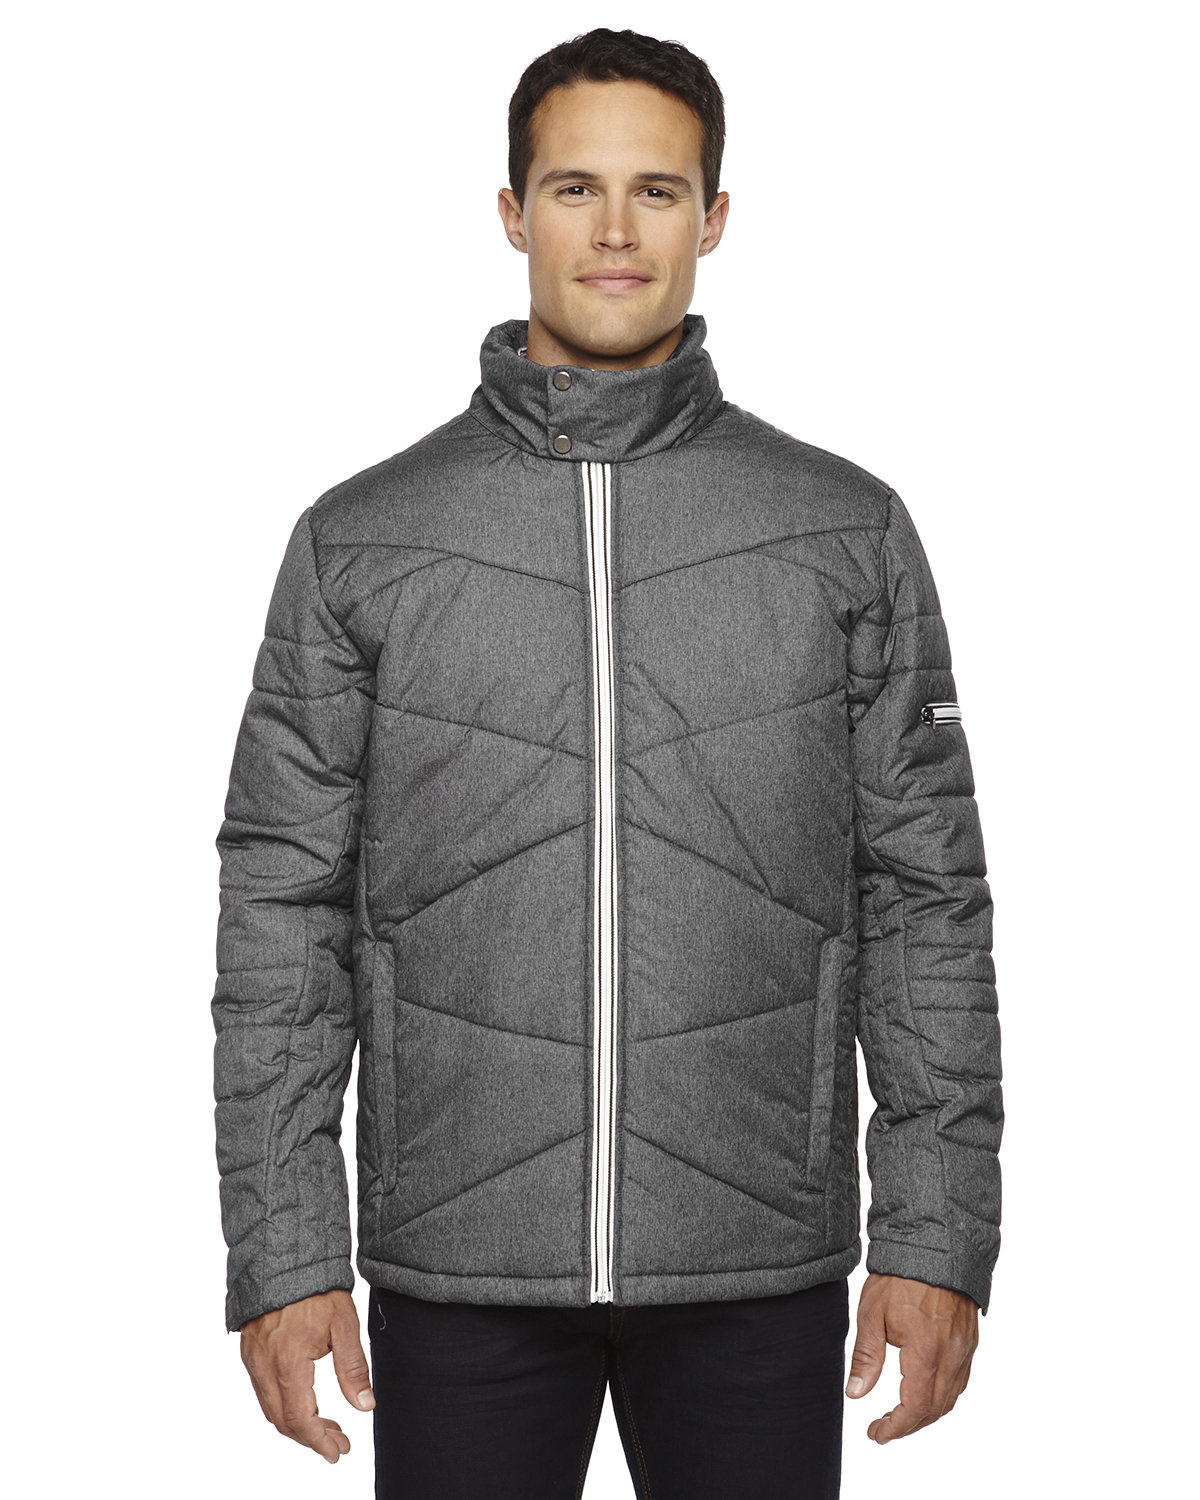 North End 88698 - Men's Avant Tech Melange Insulated Jacket with Heat Reflect Technology